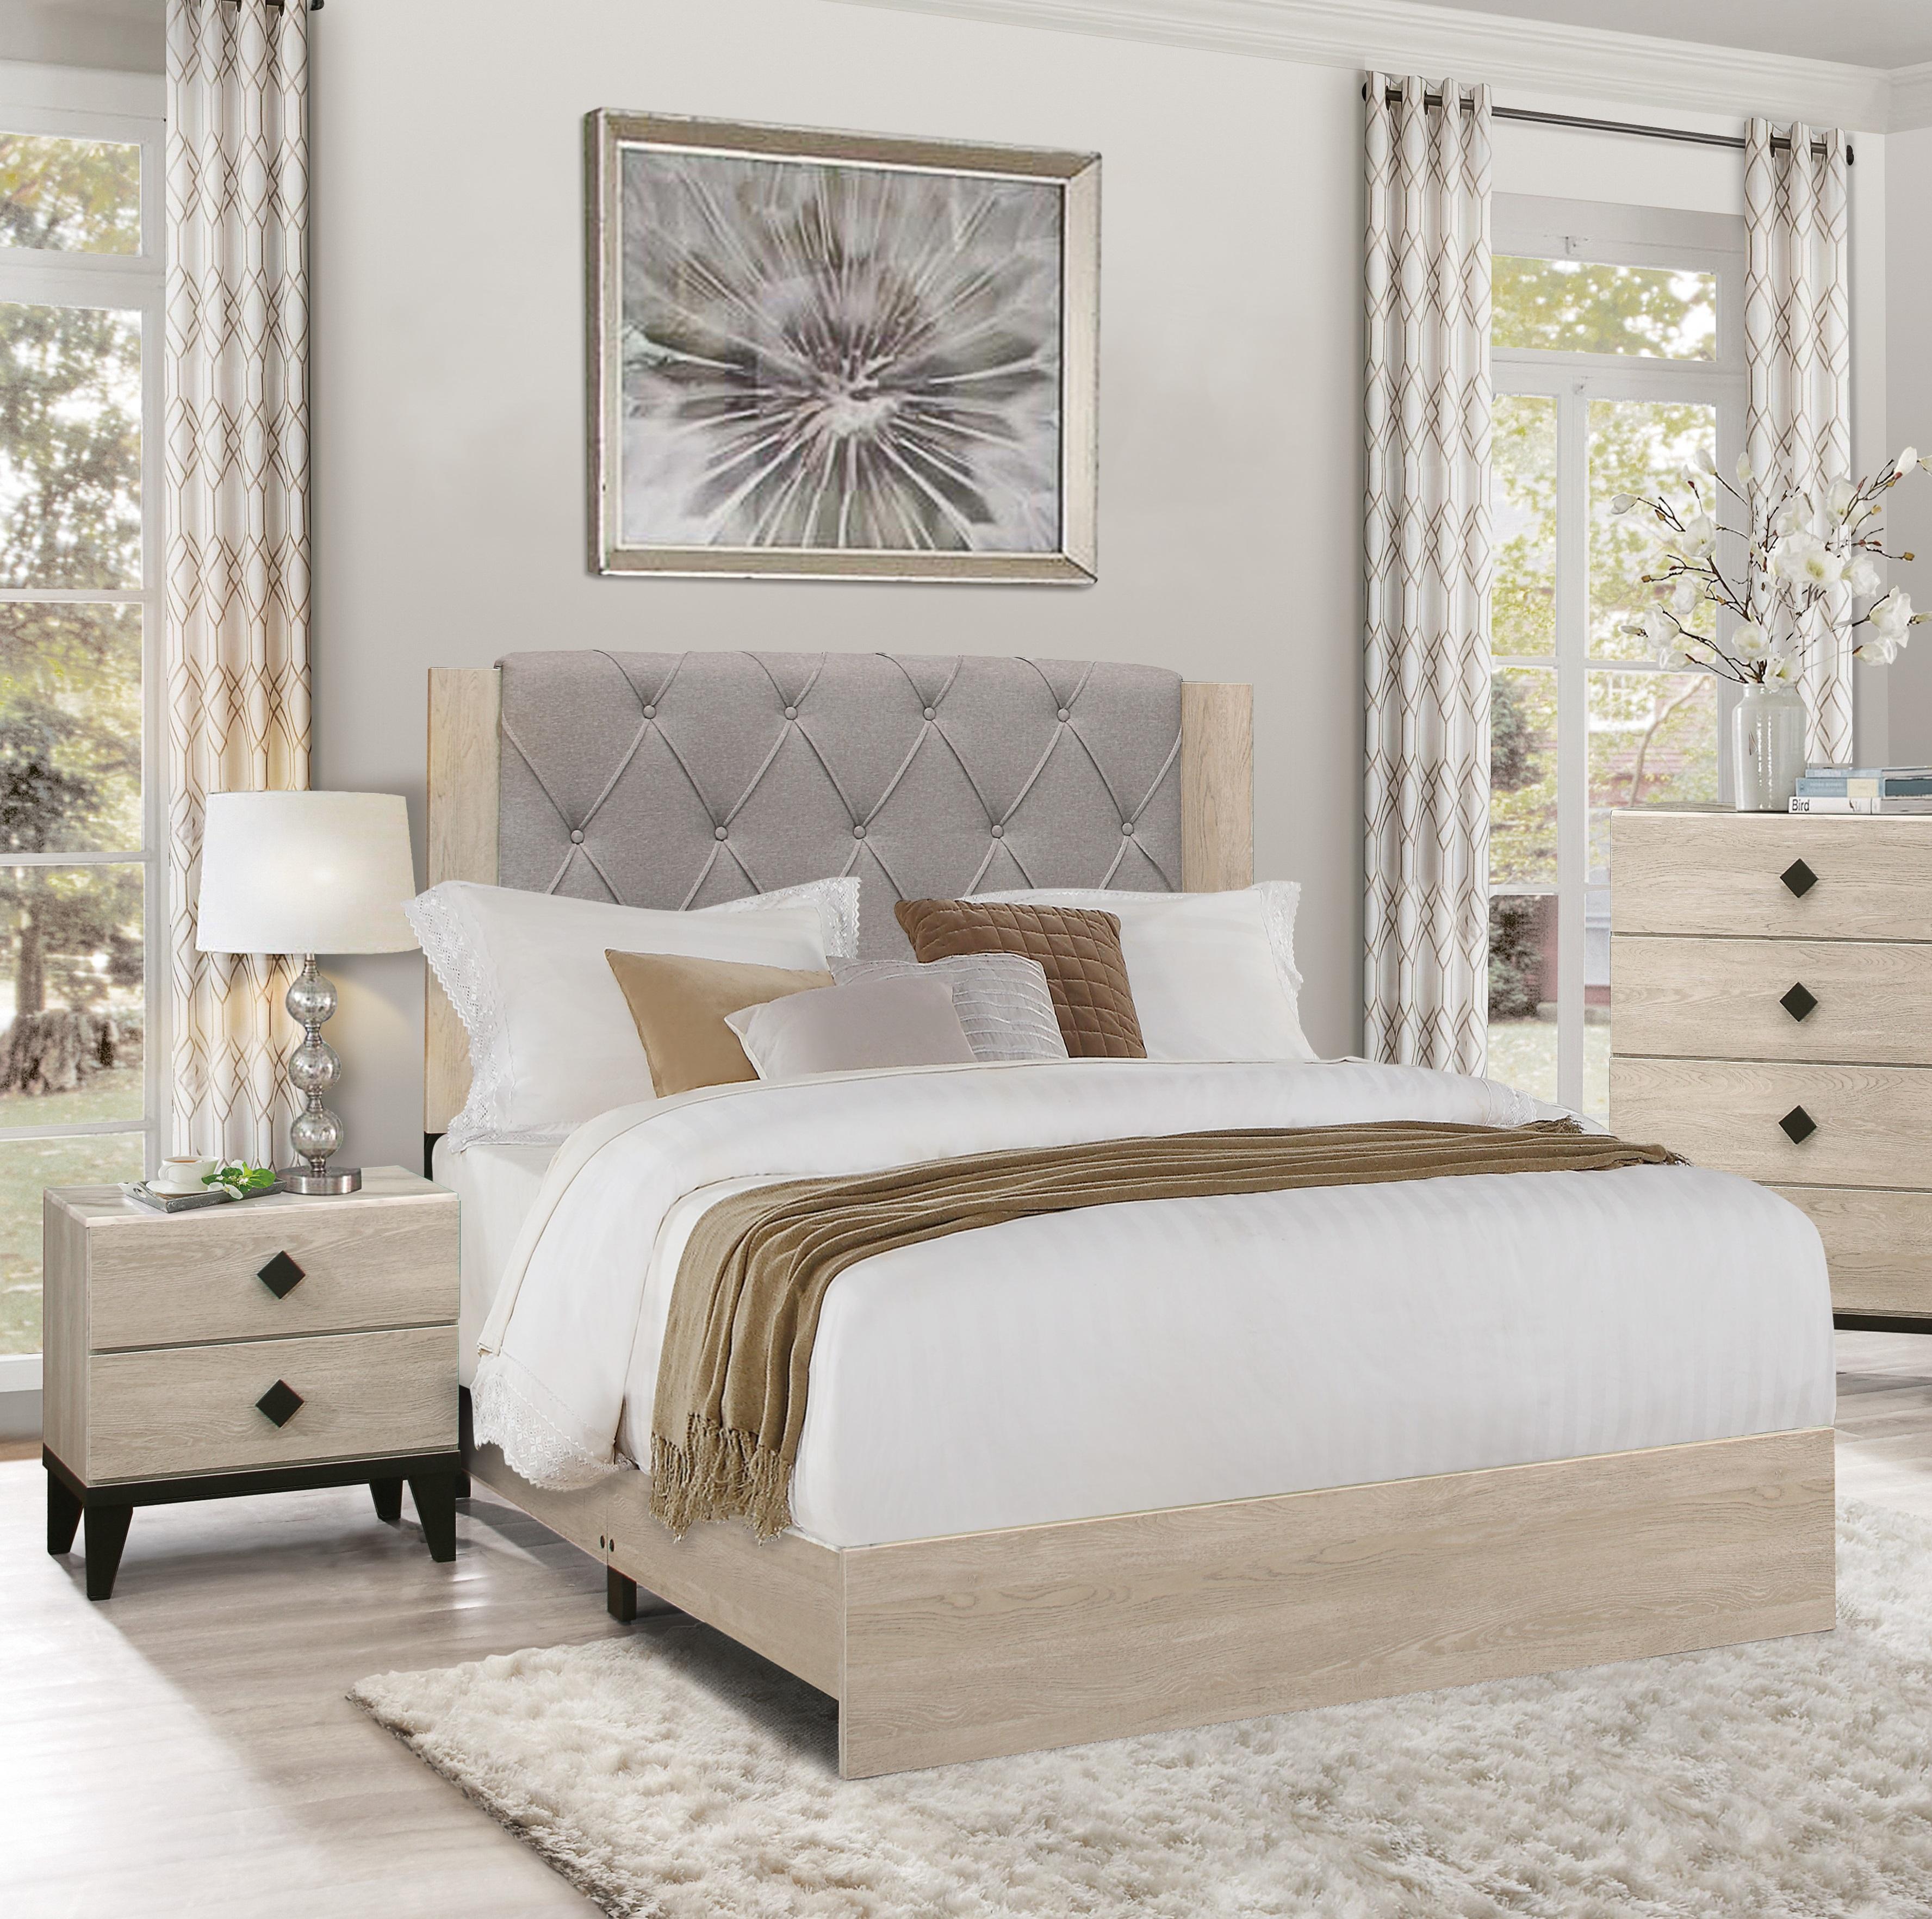 Modern Bedroom Set 1524-1-3PC Whiting 1524-1-3PC in Cream Polyester